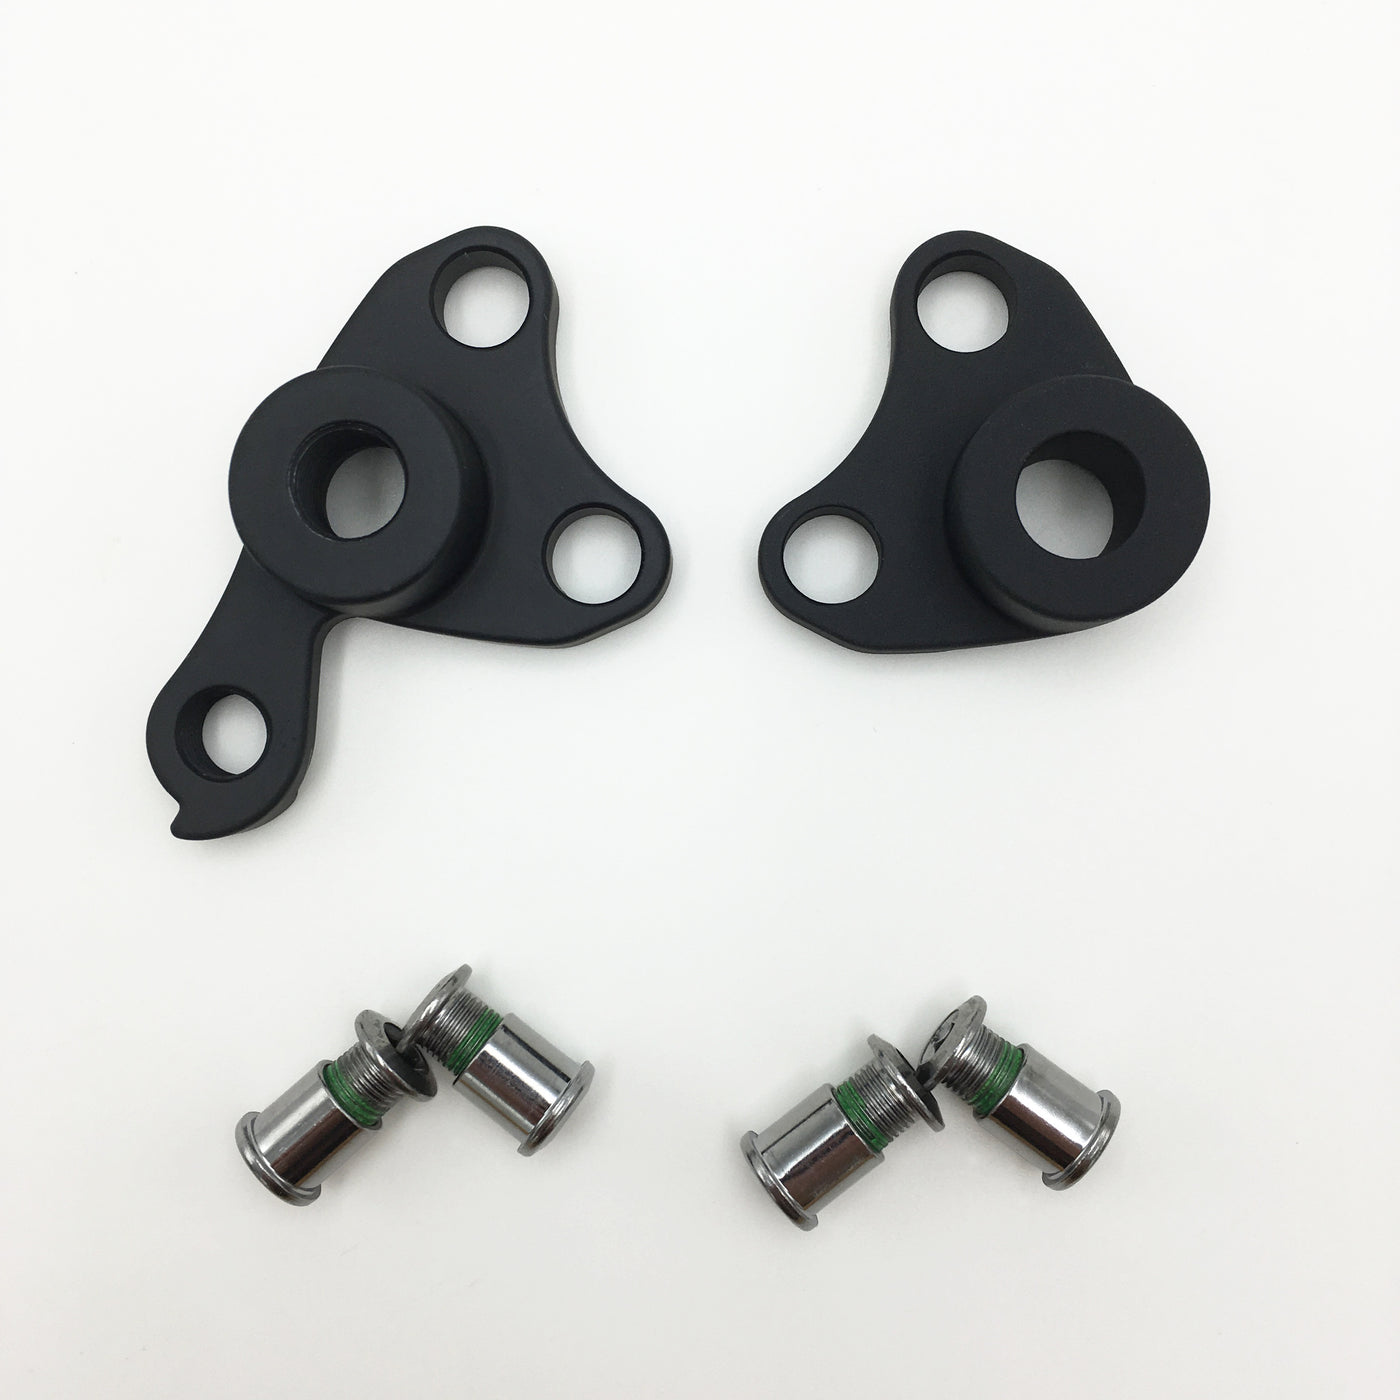 Thru-axle modular dropouts only - with/without eyelets - 142/12 - 1.0 thread pitch